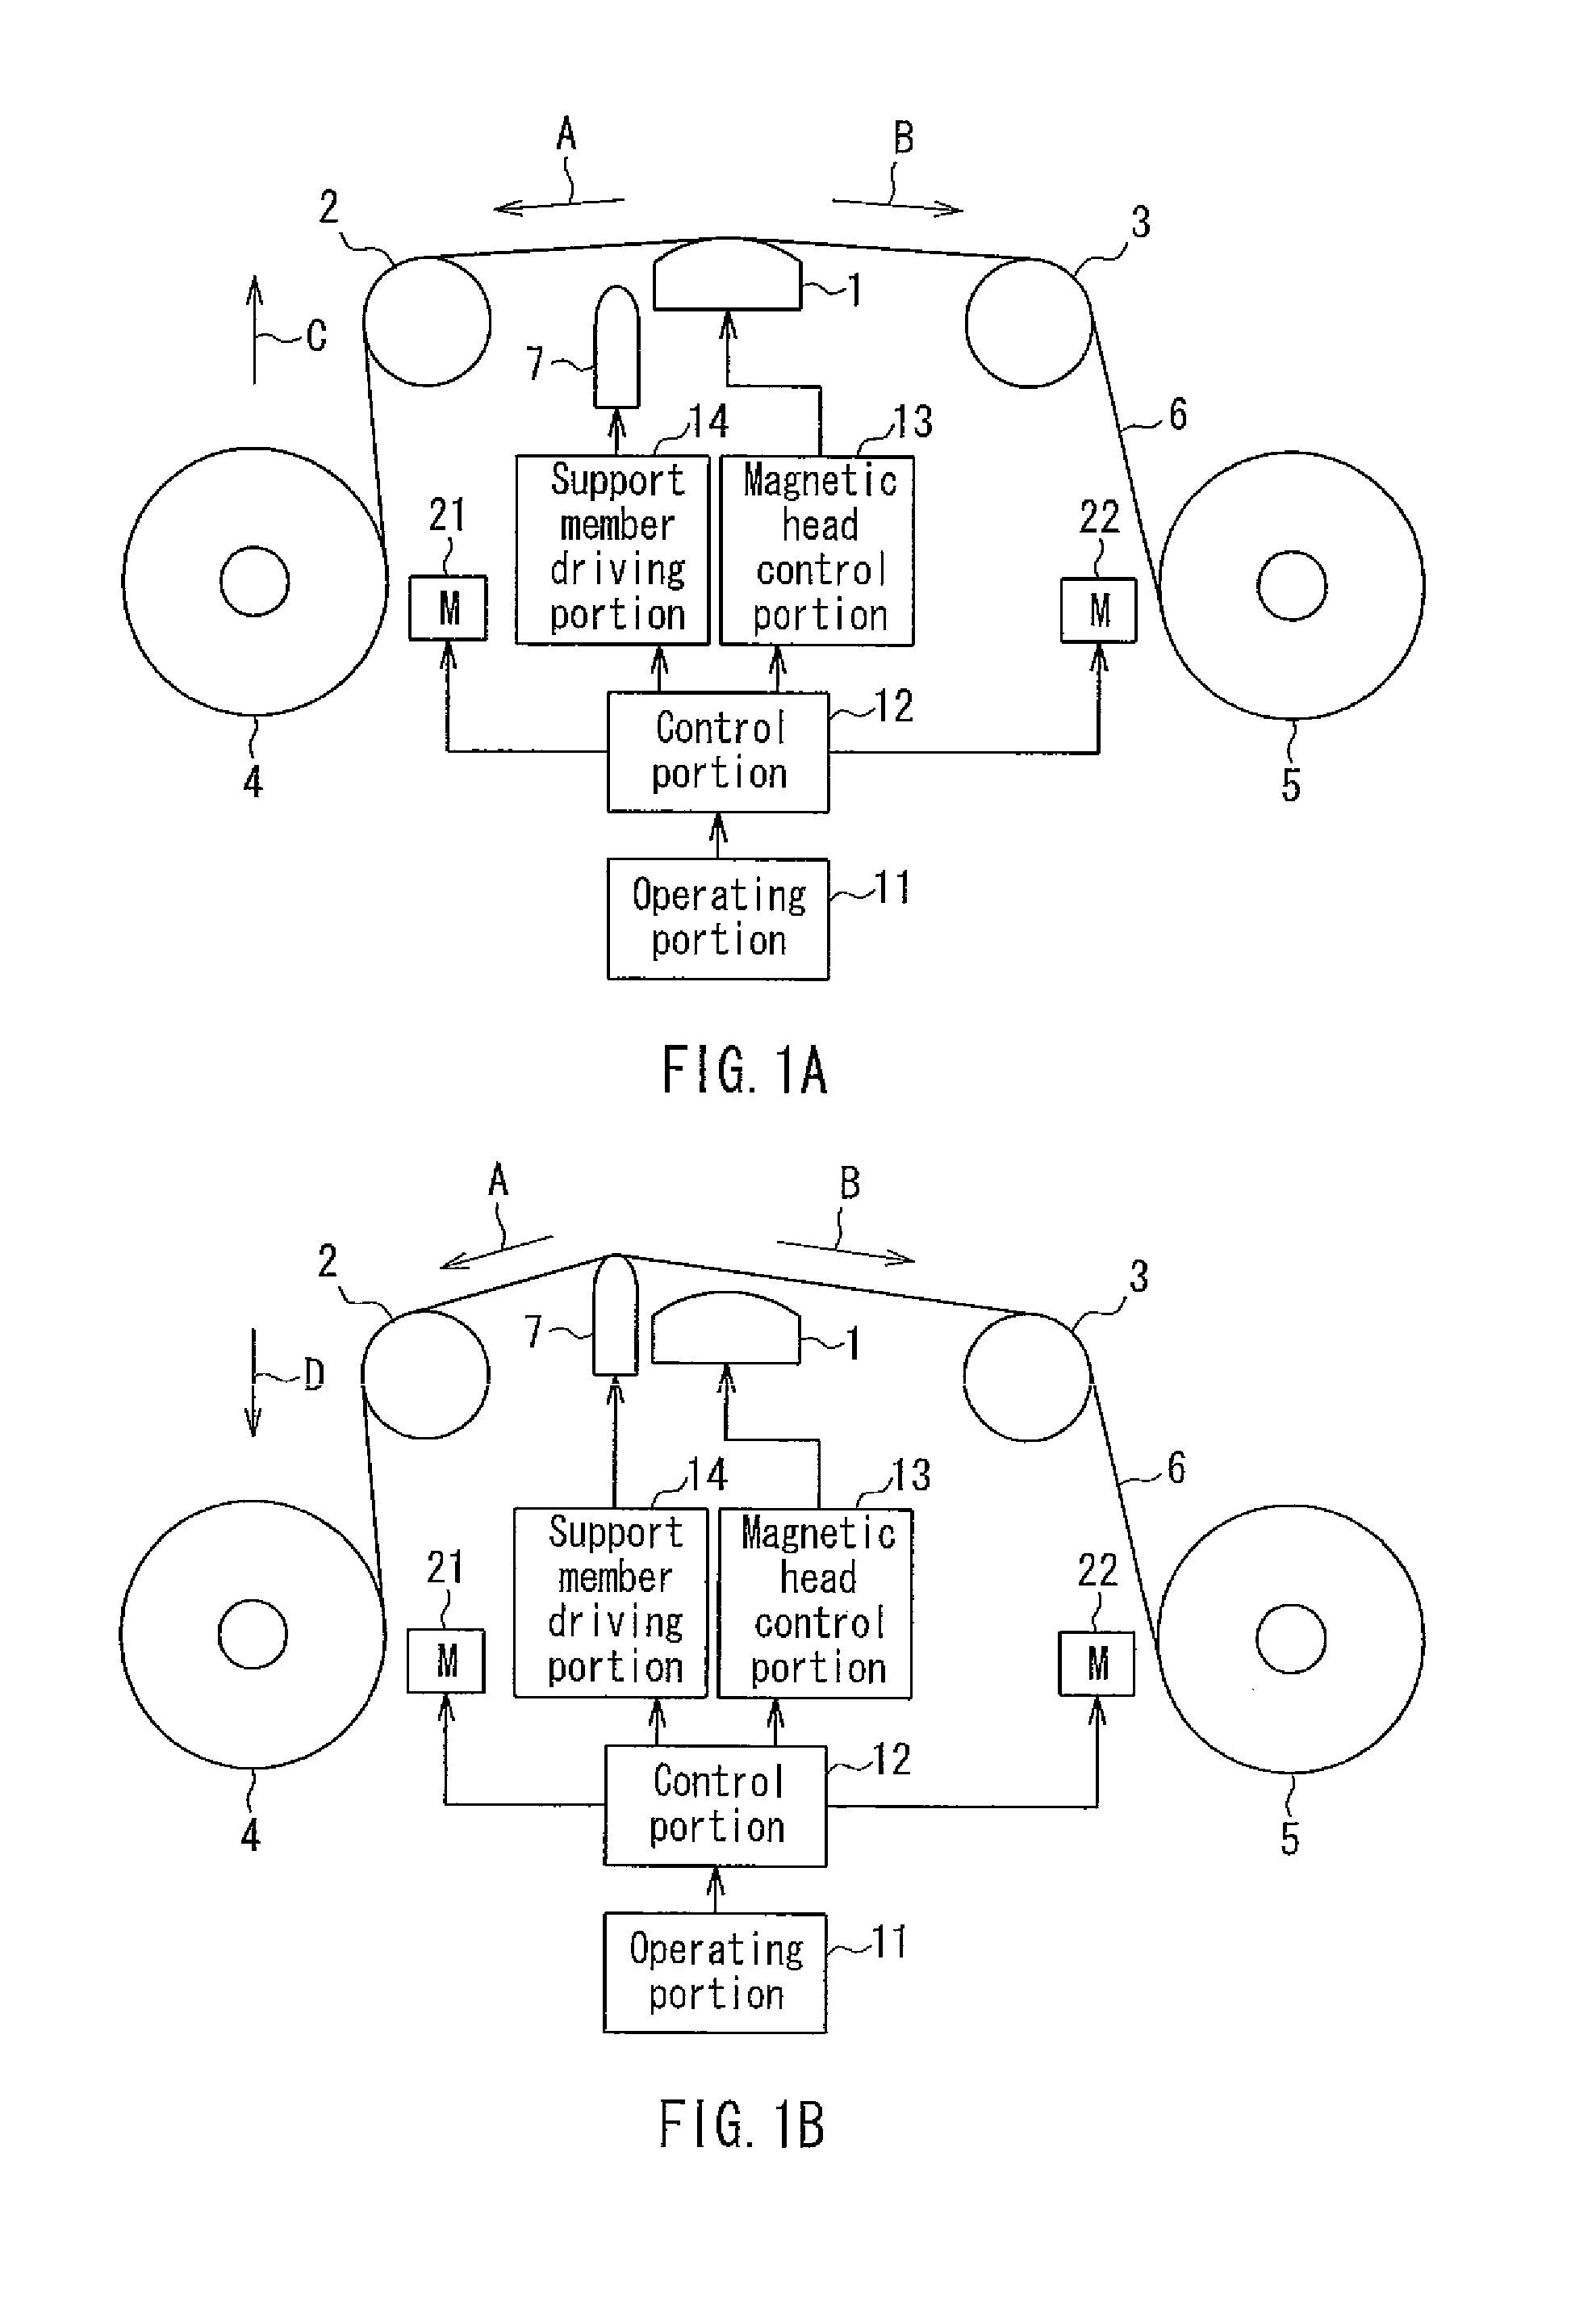 Magnetic tape driving apparatus comprising a tape separation portion that separates a magnetic tape from a magnetoresistive head unit